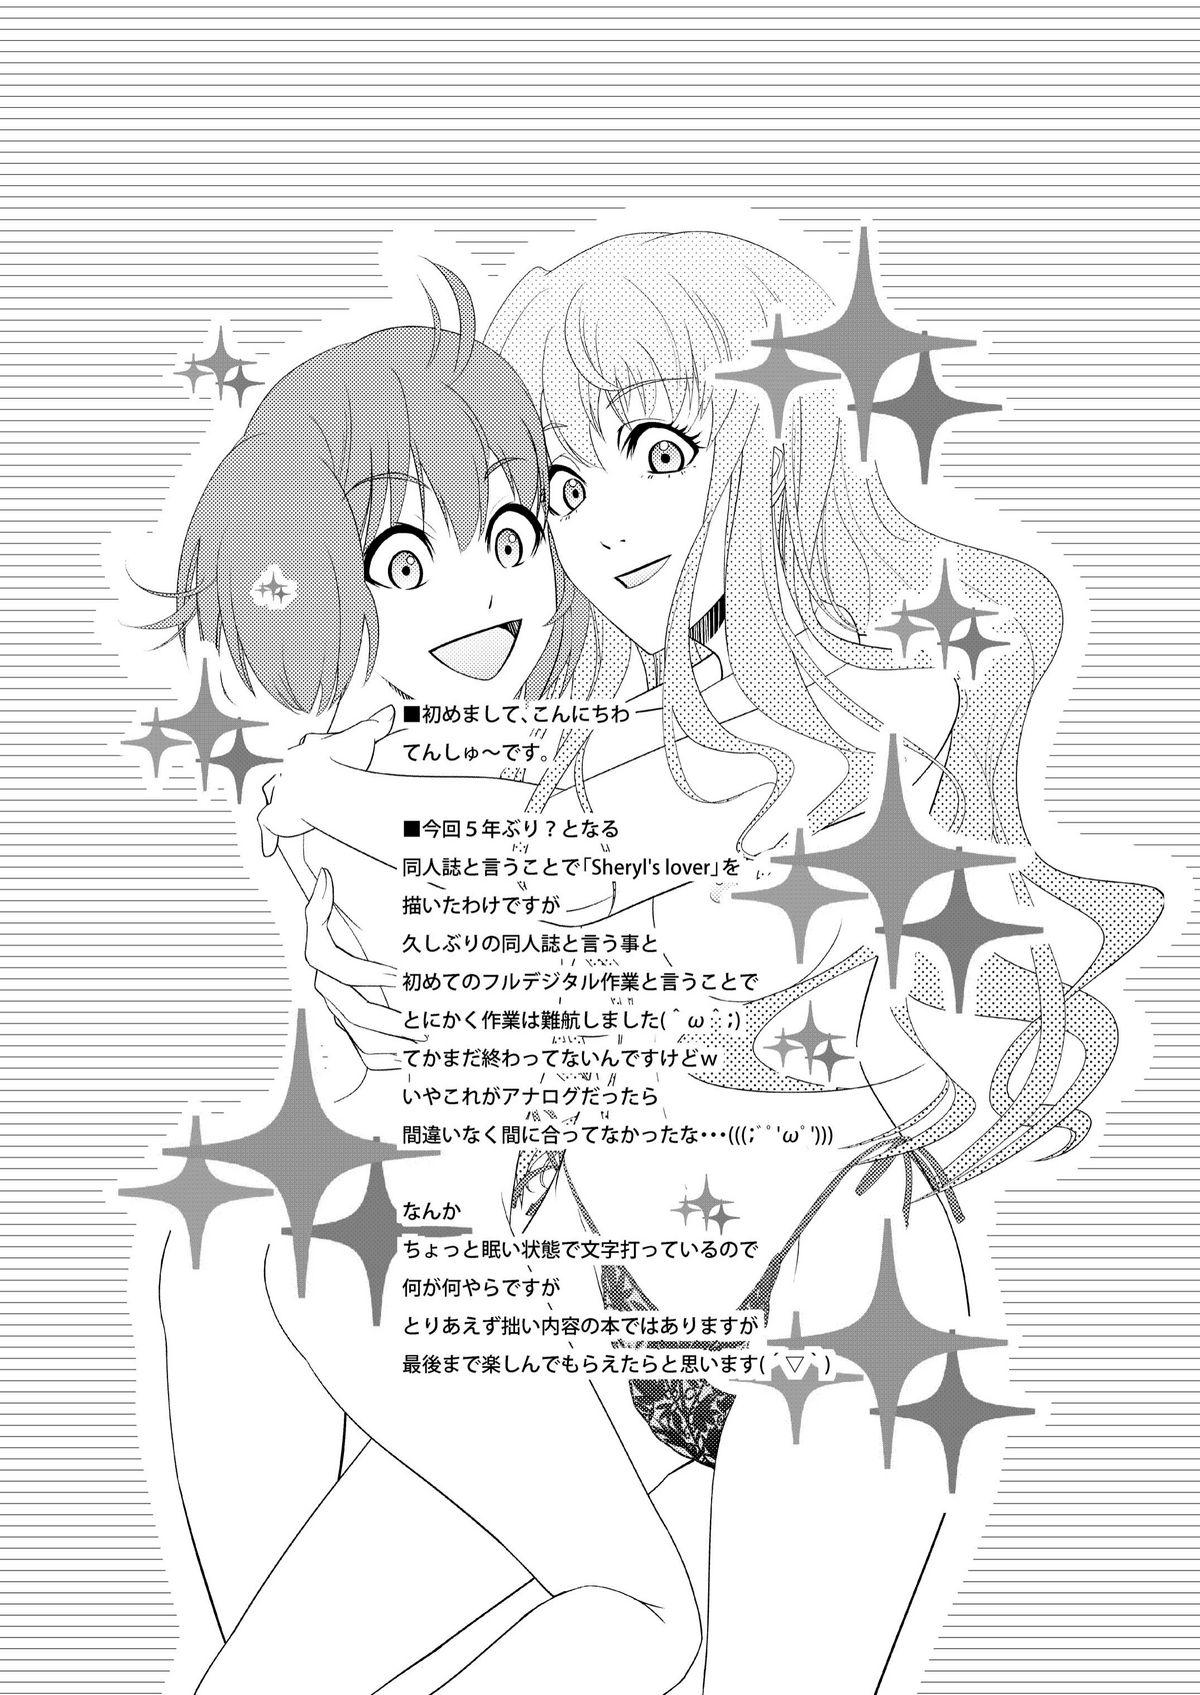 Cam Sheryl's lover - Macross frontier White - Page 4